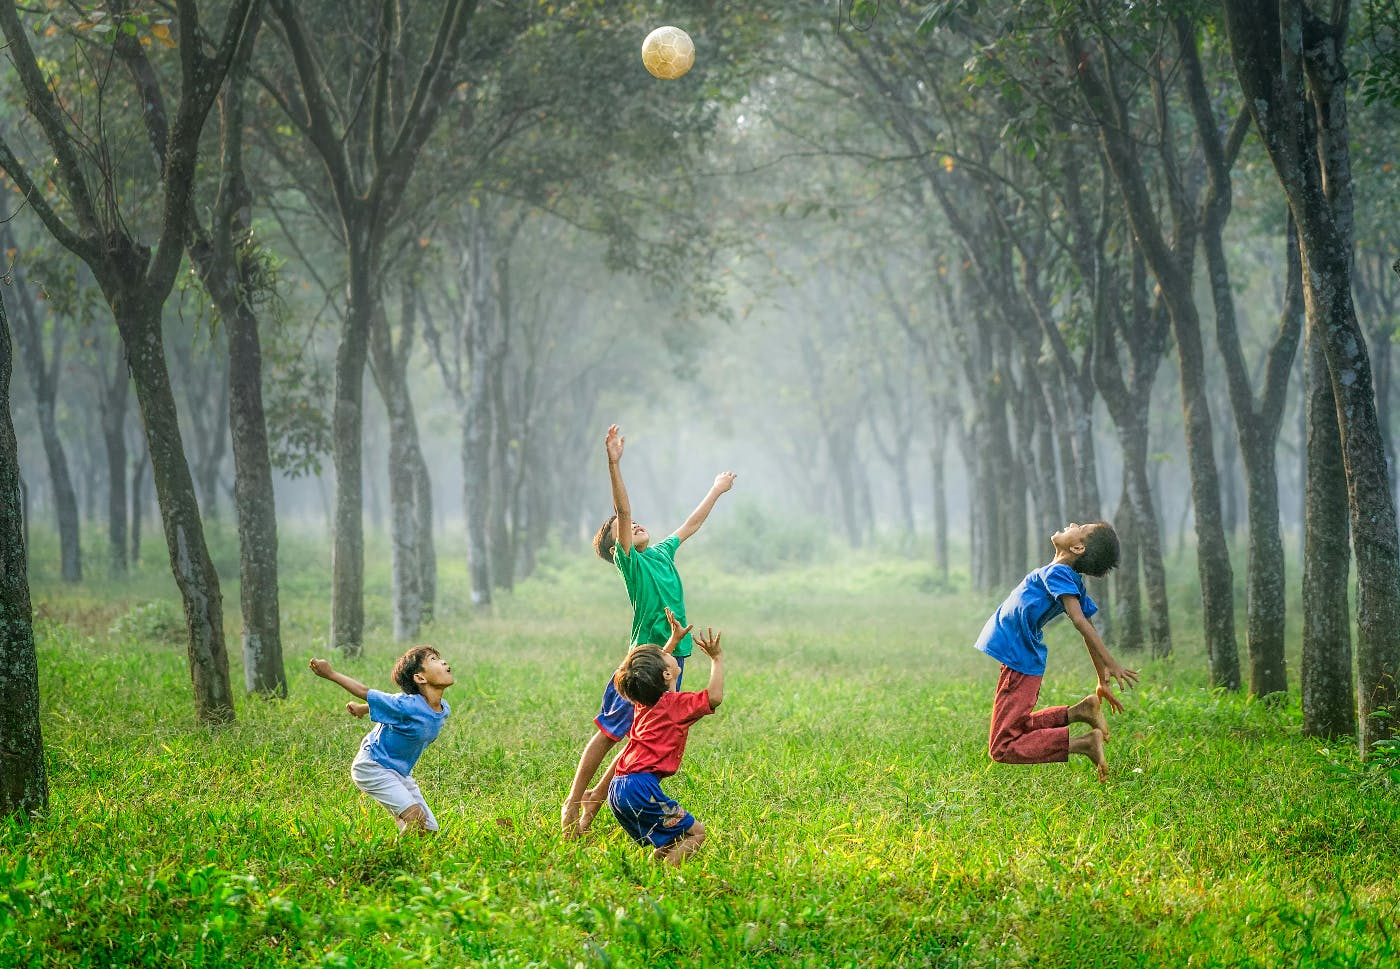 4 kids in a clearing throwing a soccer ball in the air